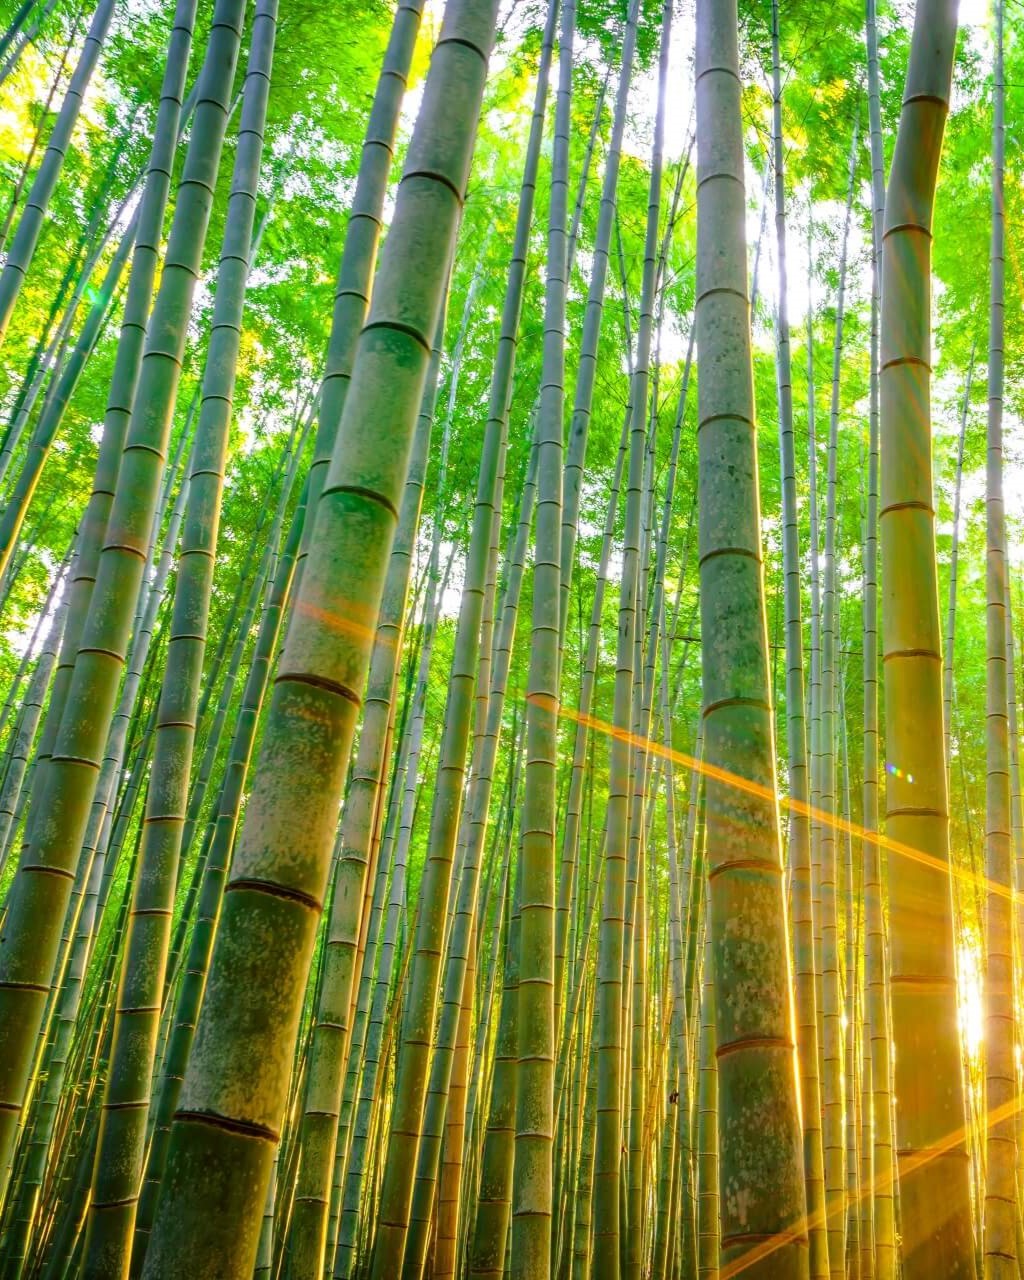 Bamboo forrest background image for header text